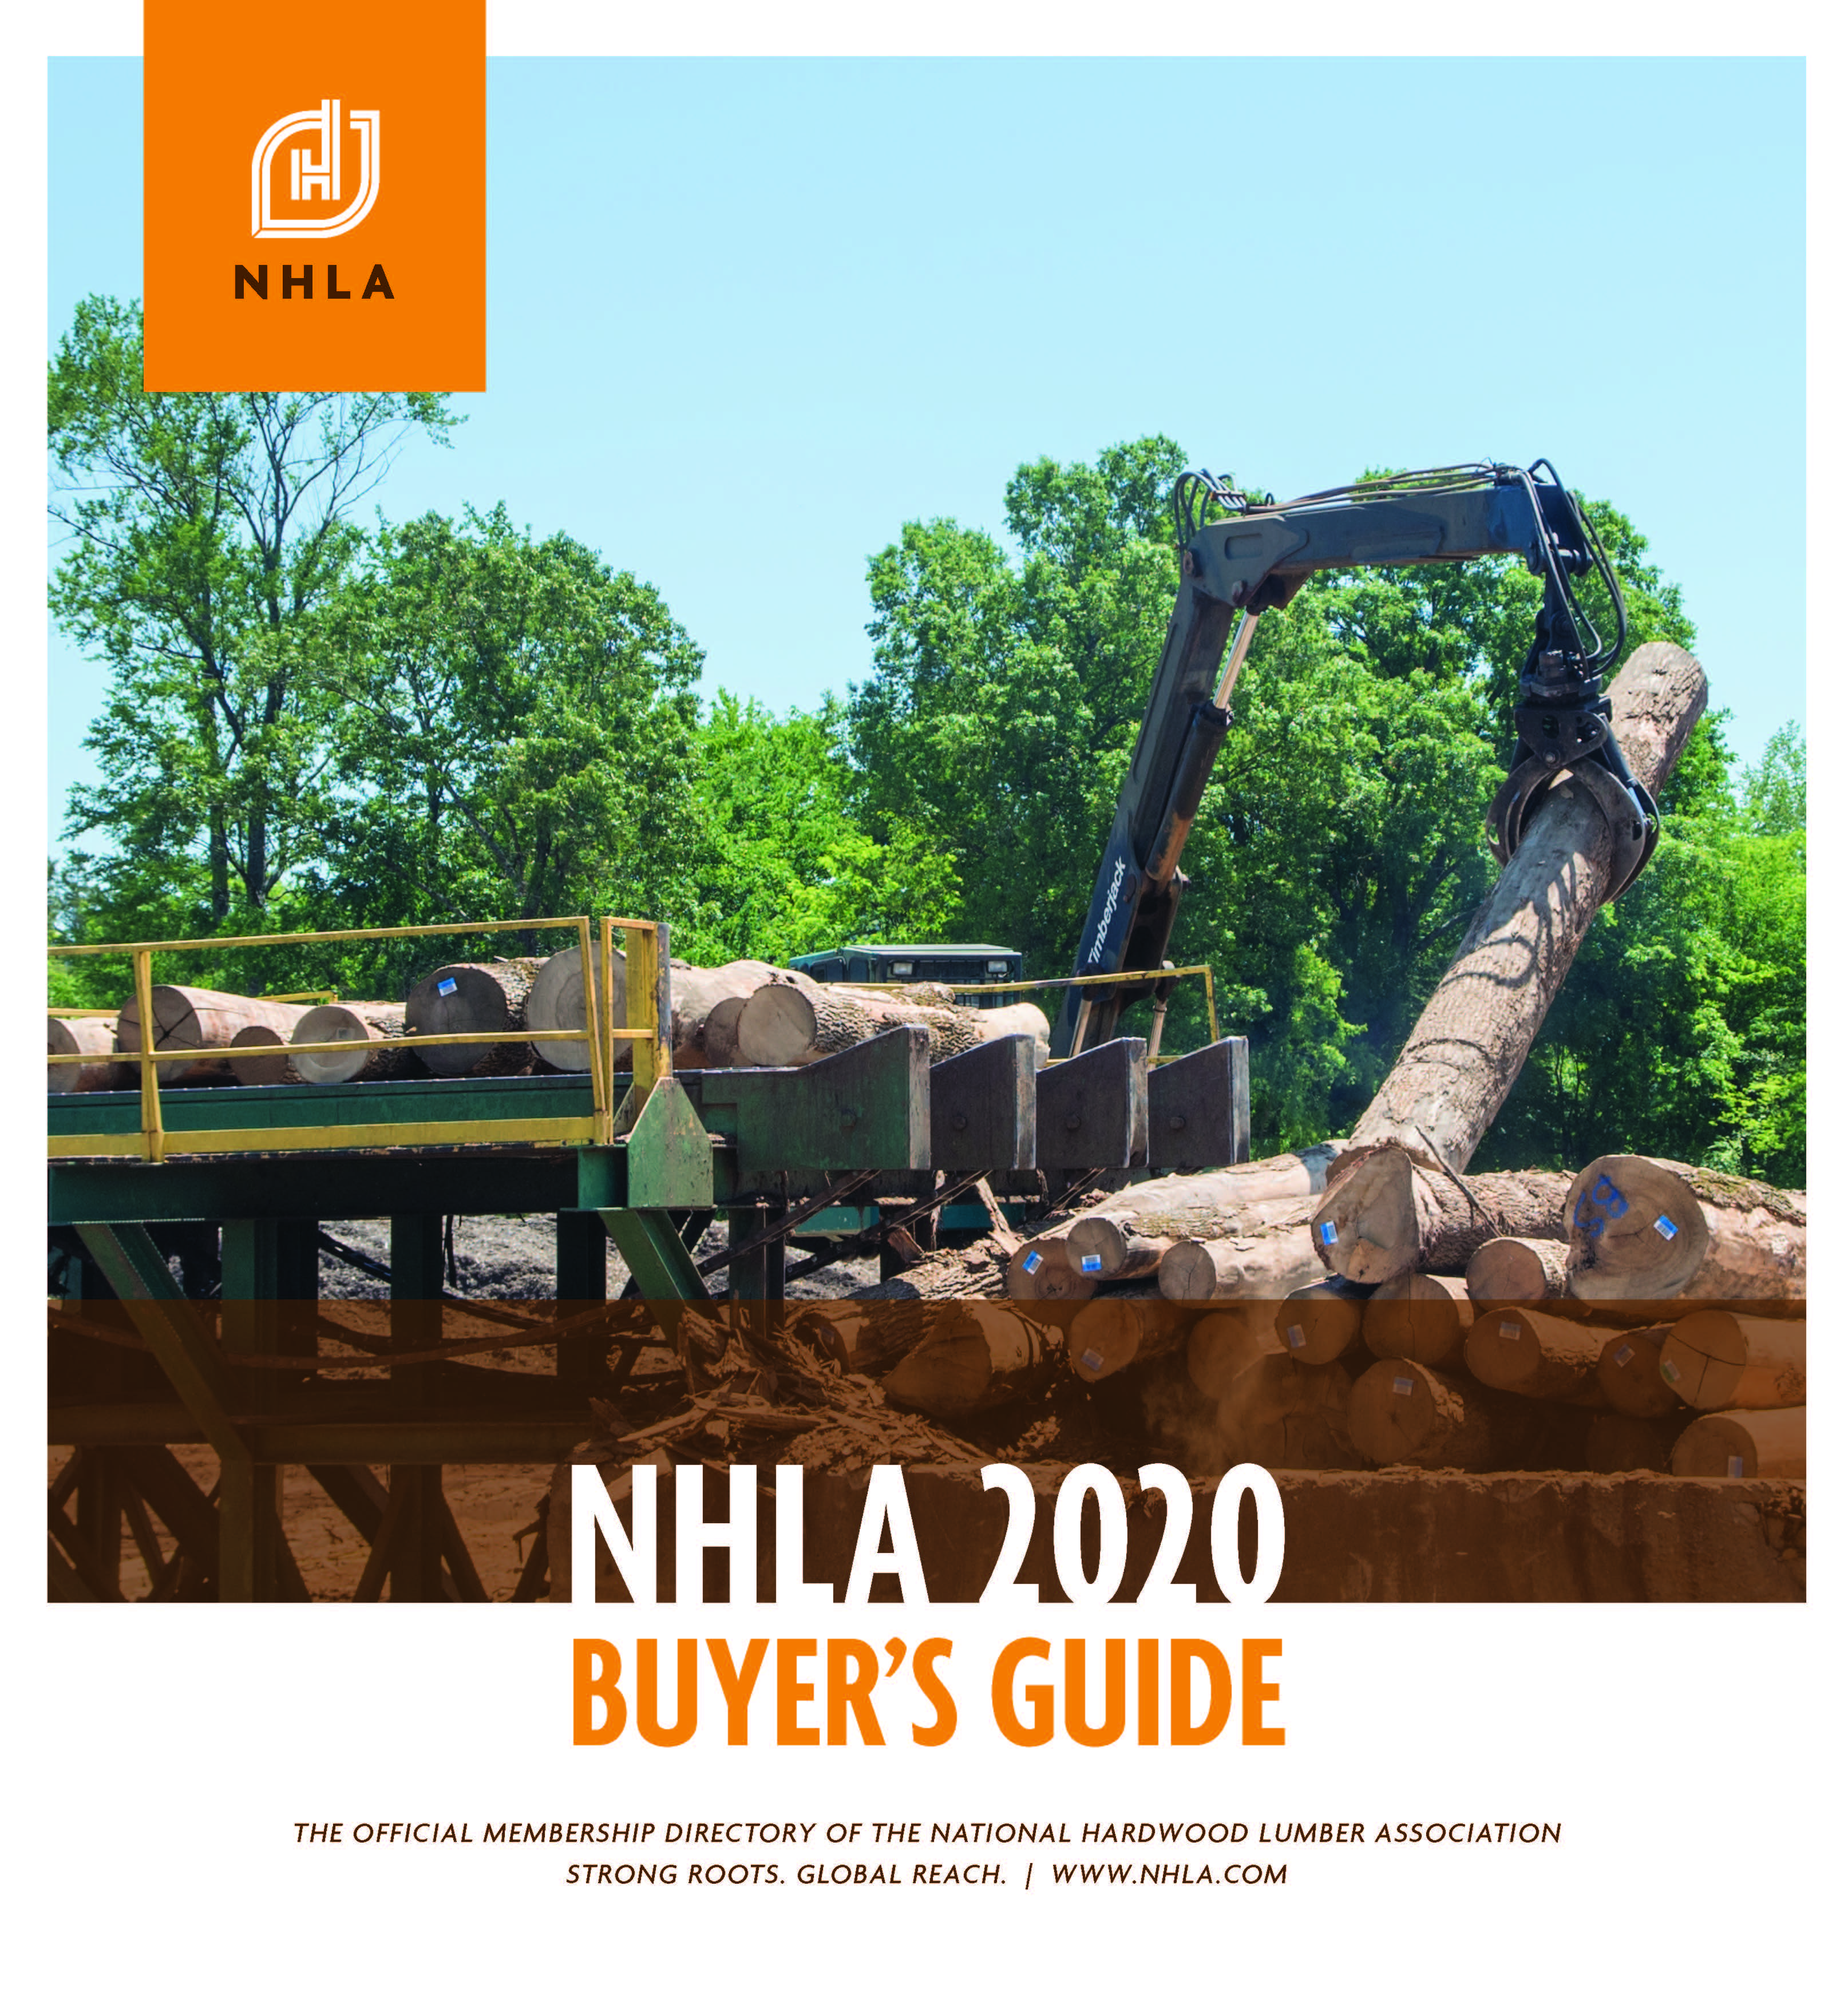 NHLA Buyer's Guide - 2020 Edition